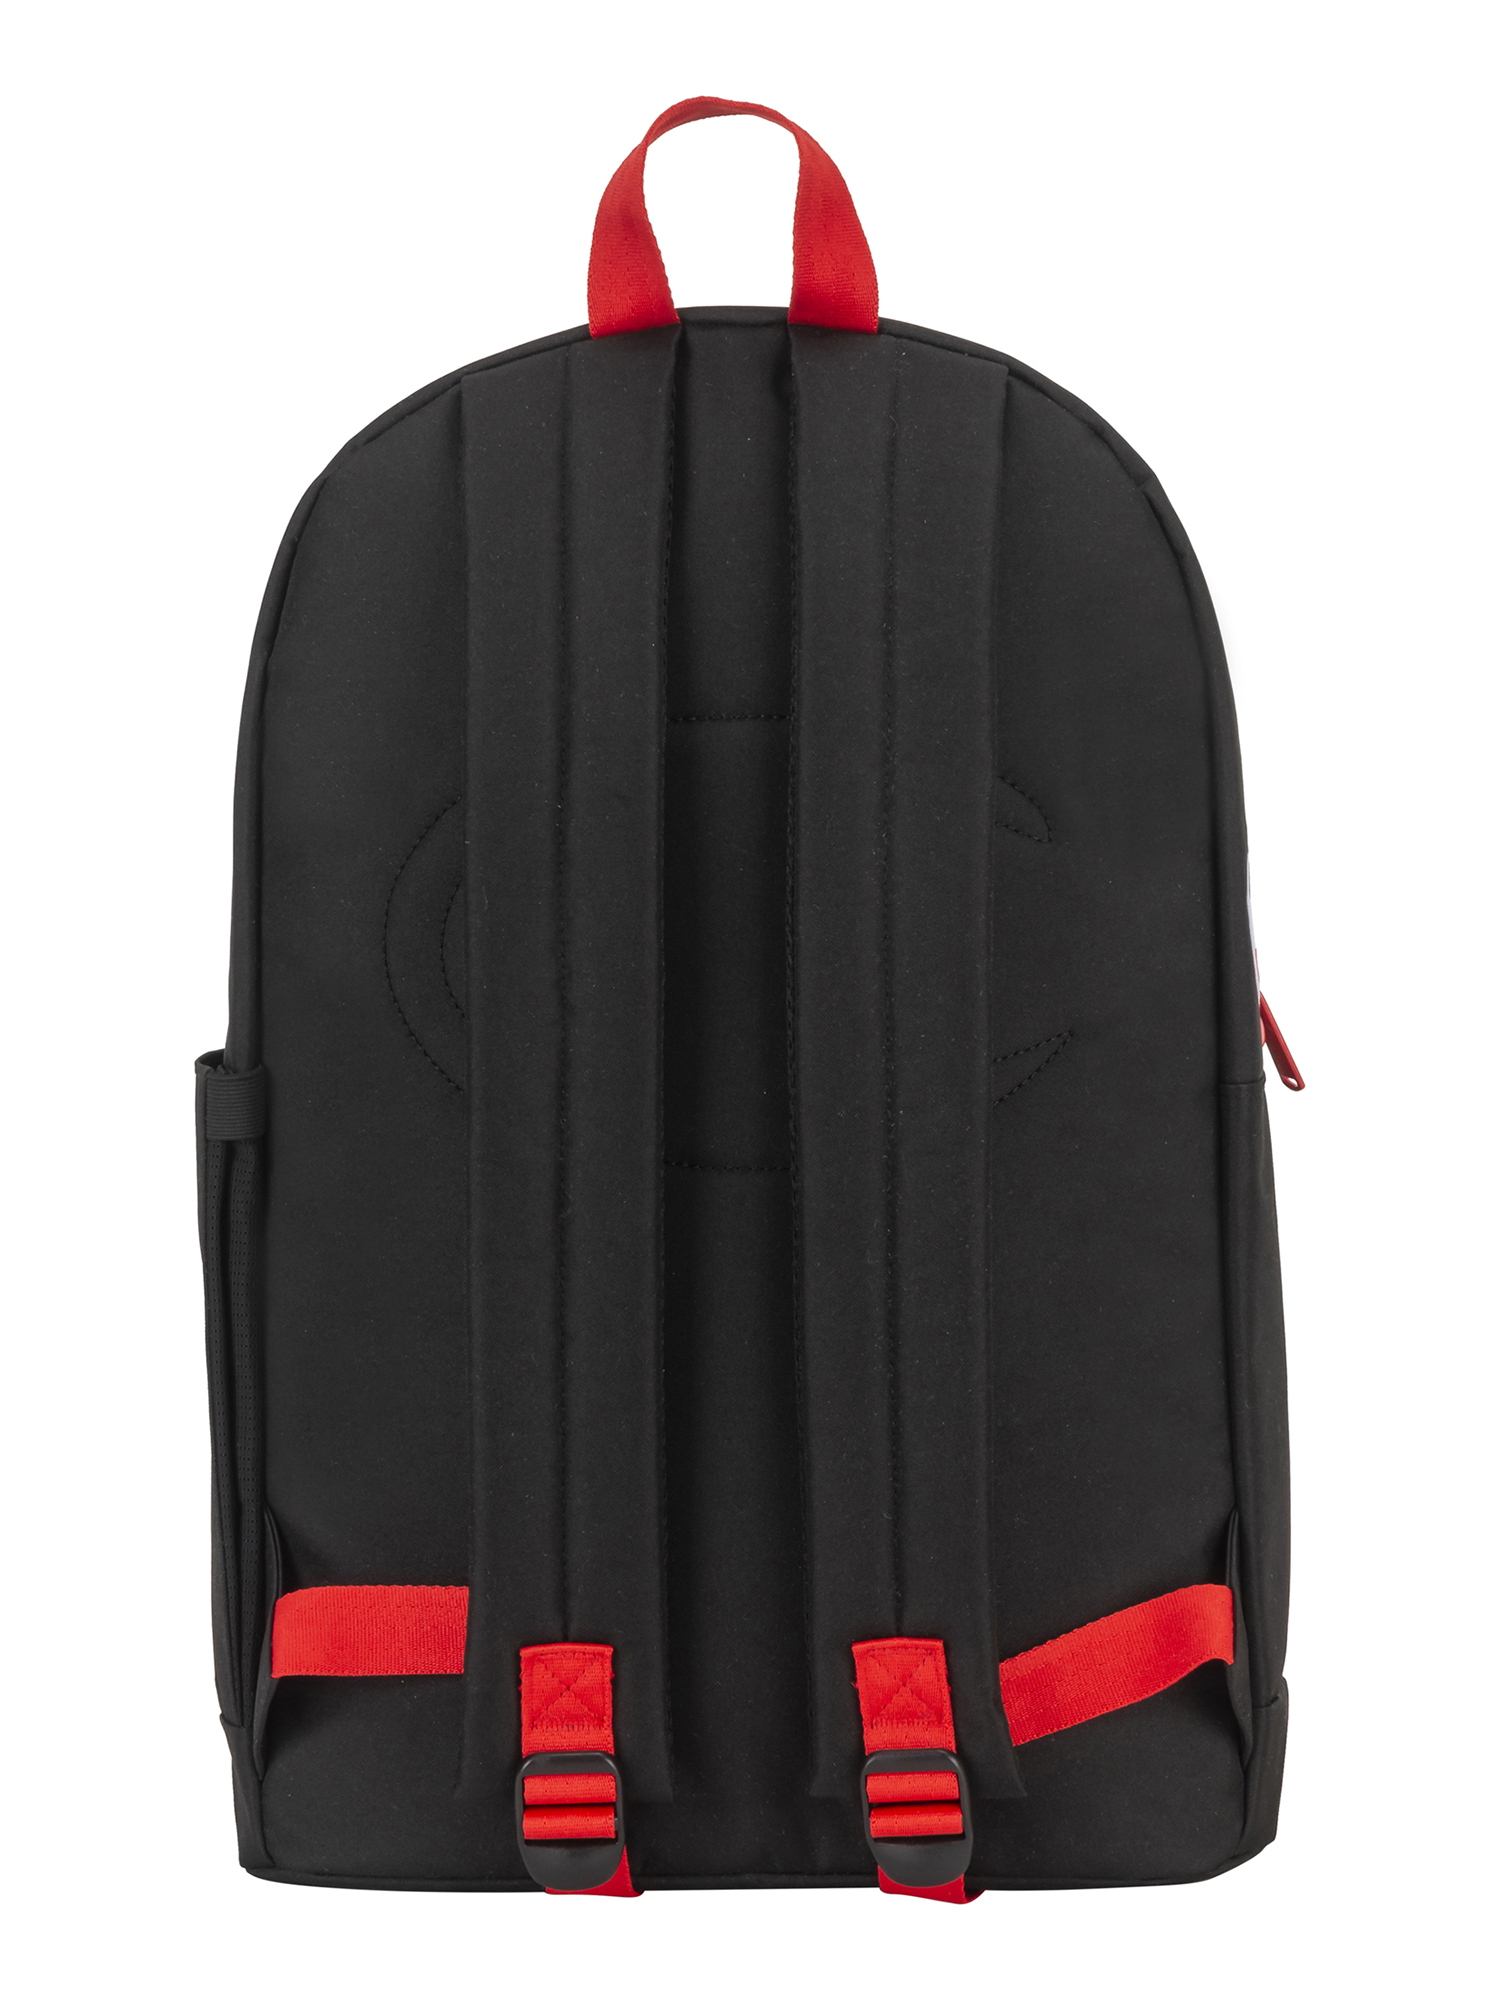 Champion Youth Supercize Backpack - image 3 of 4